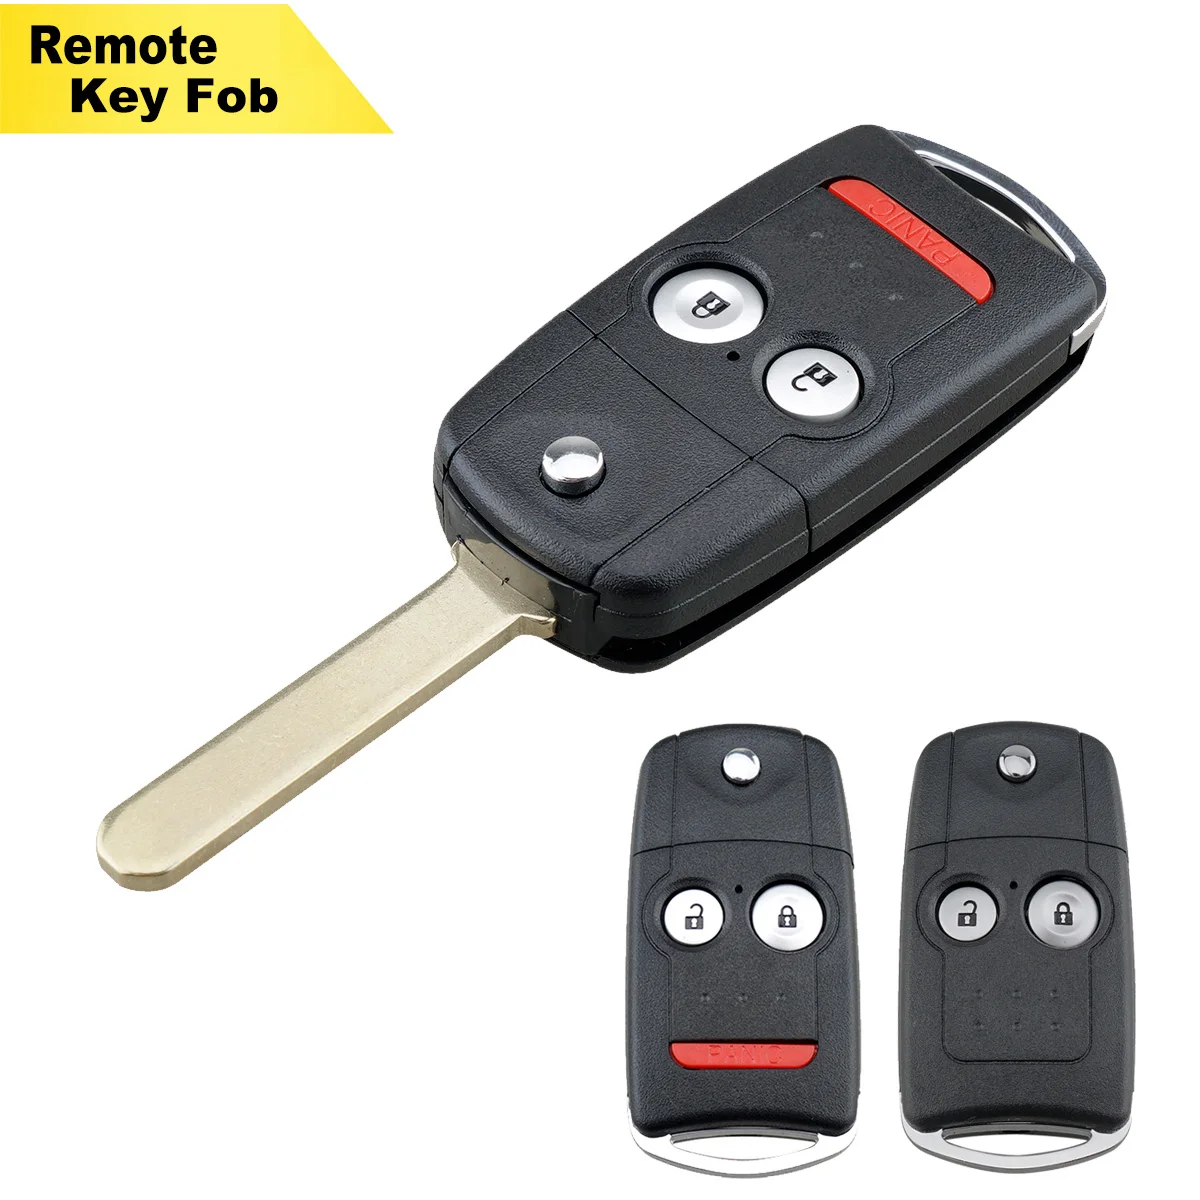 2 / 2 + 1 Buttons Car Key Fob Shell Replacement Remote Key Case Cover Fit for Honda Civic Accord Jazz CRV HON66 Blade